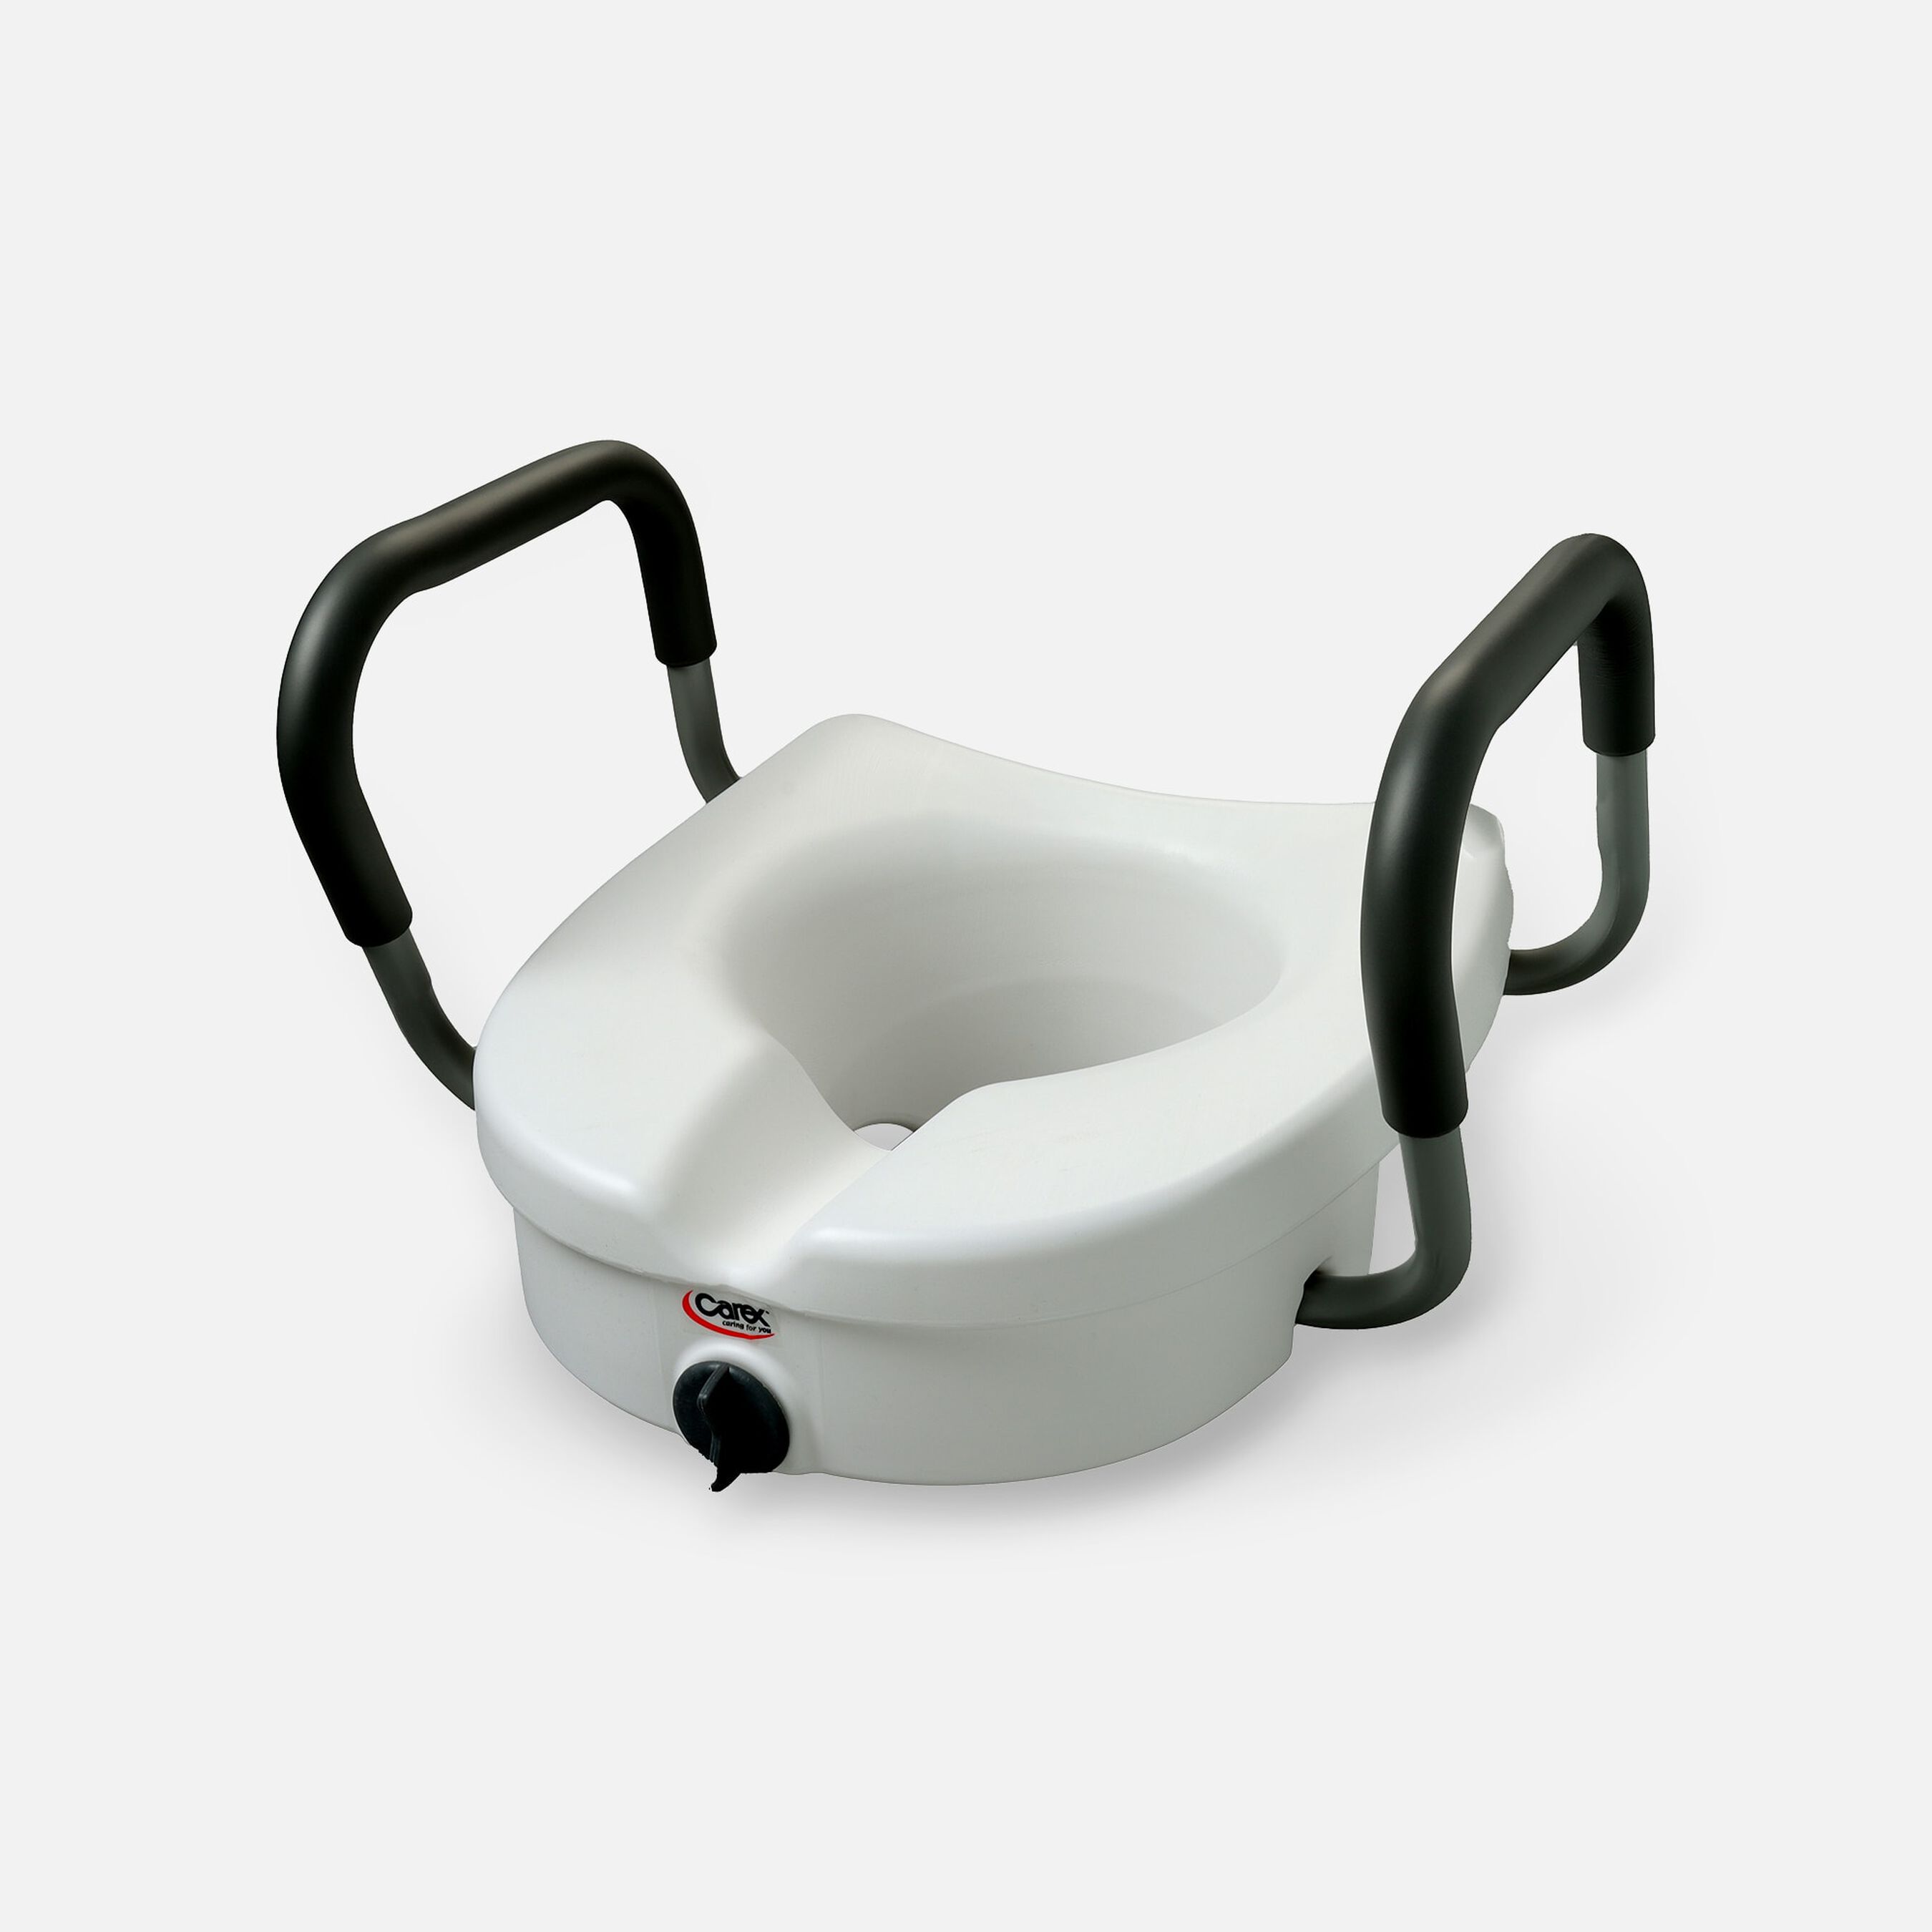 Carex Healthcare Lock Raised Toilet Seat With Arms B311c0